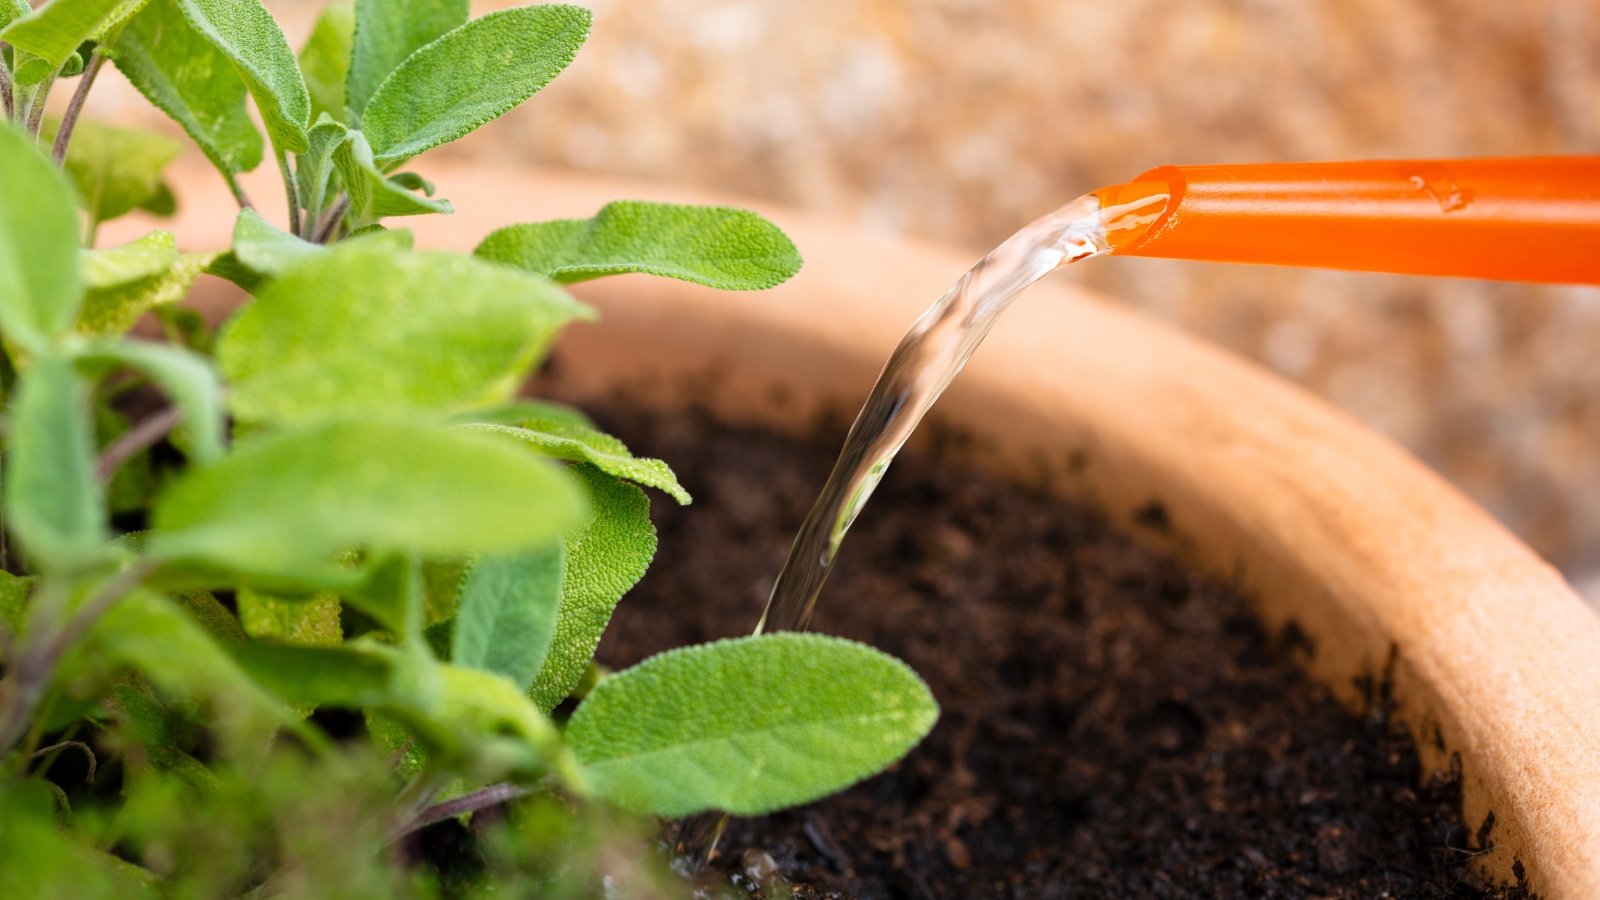 Close-up of watering a salvia in a clay pot with an orange watering can in the garden.